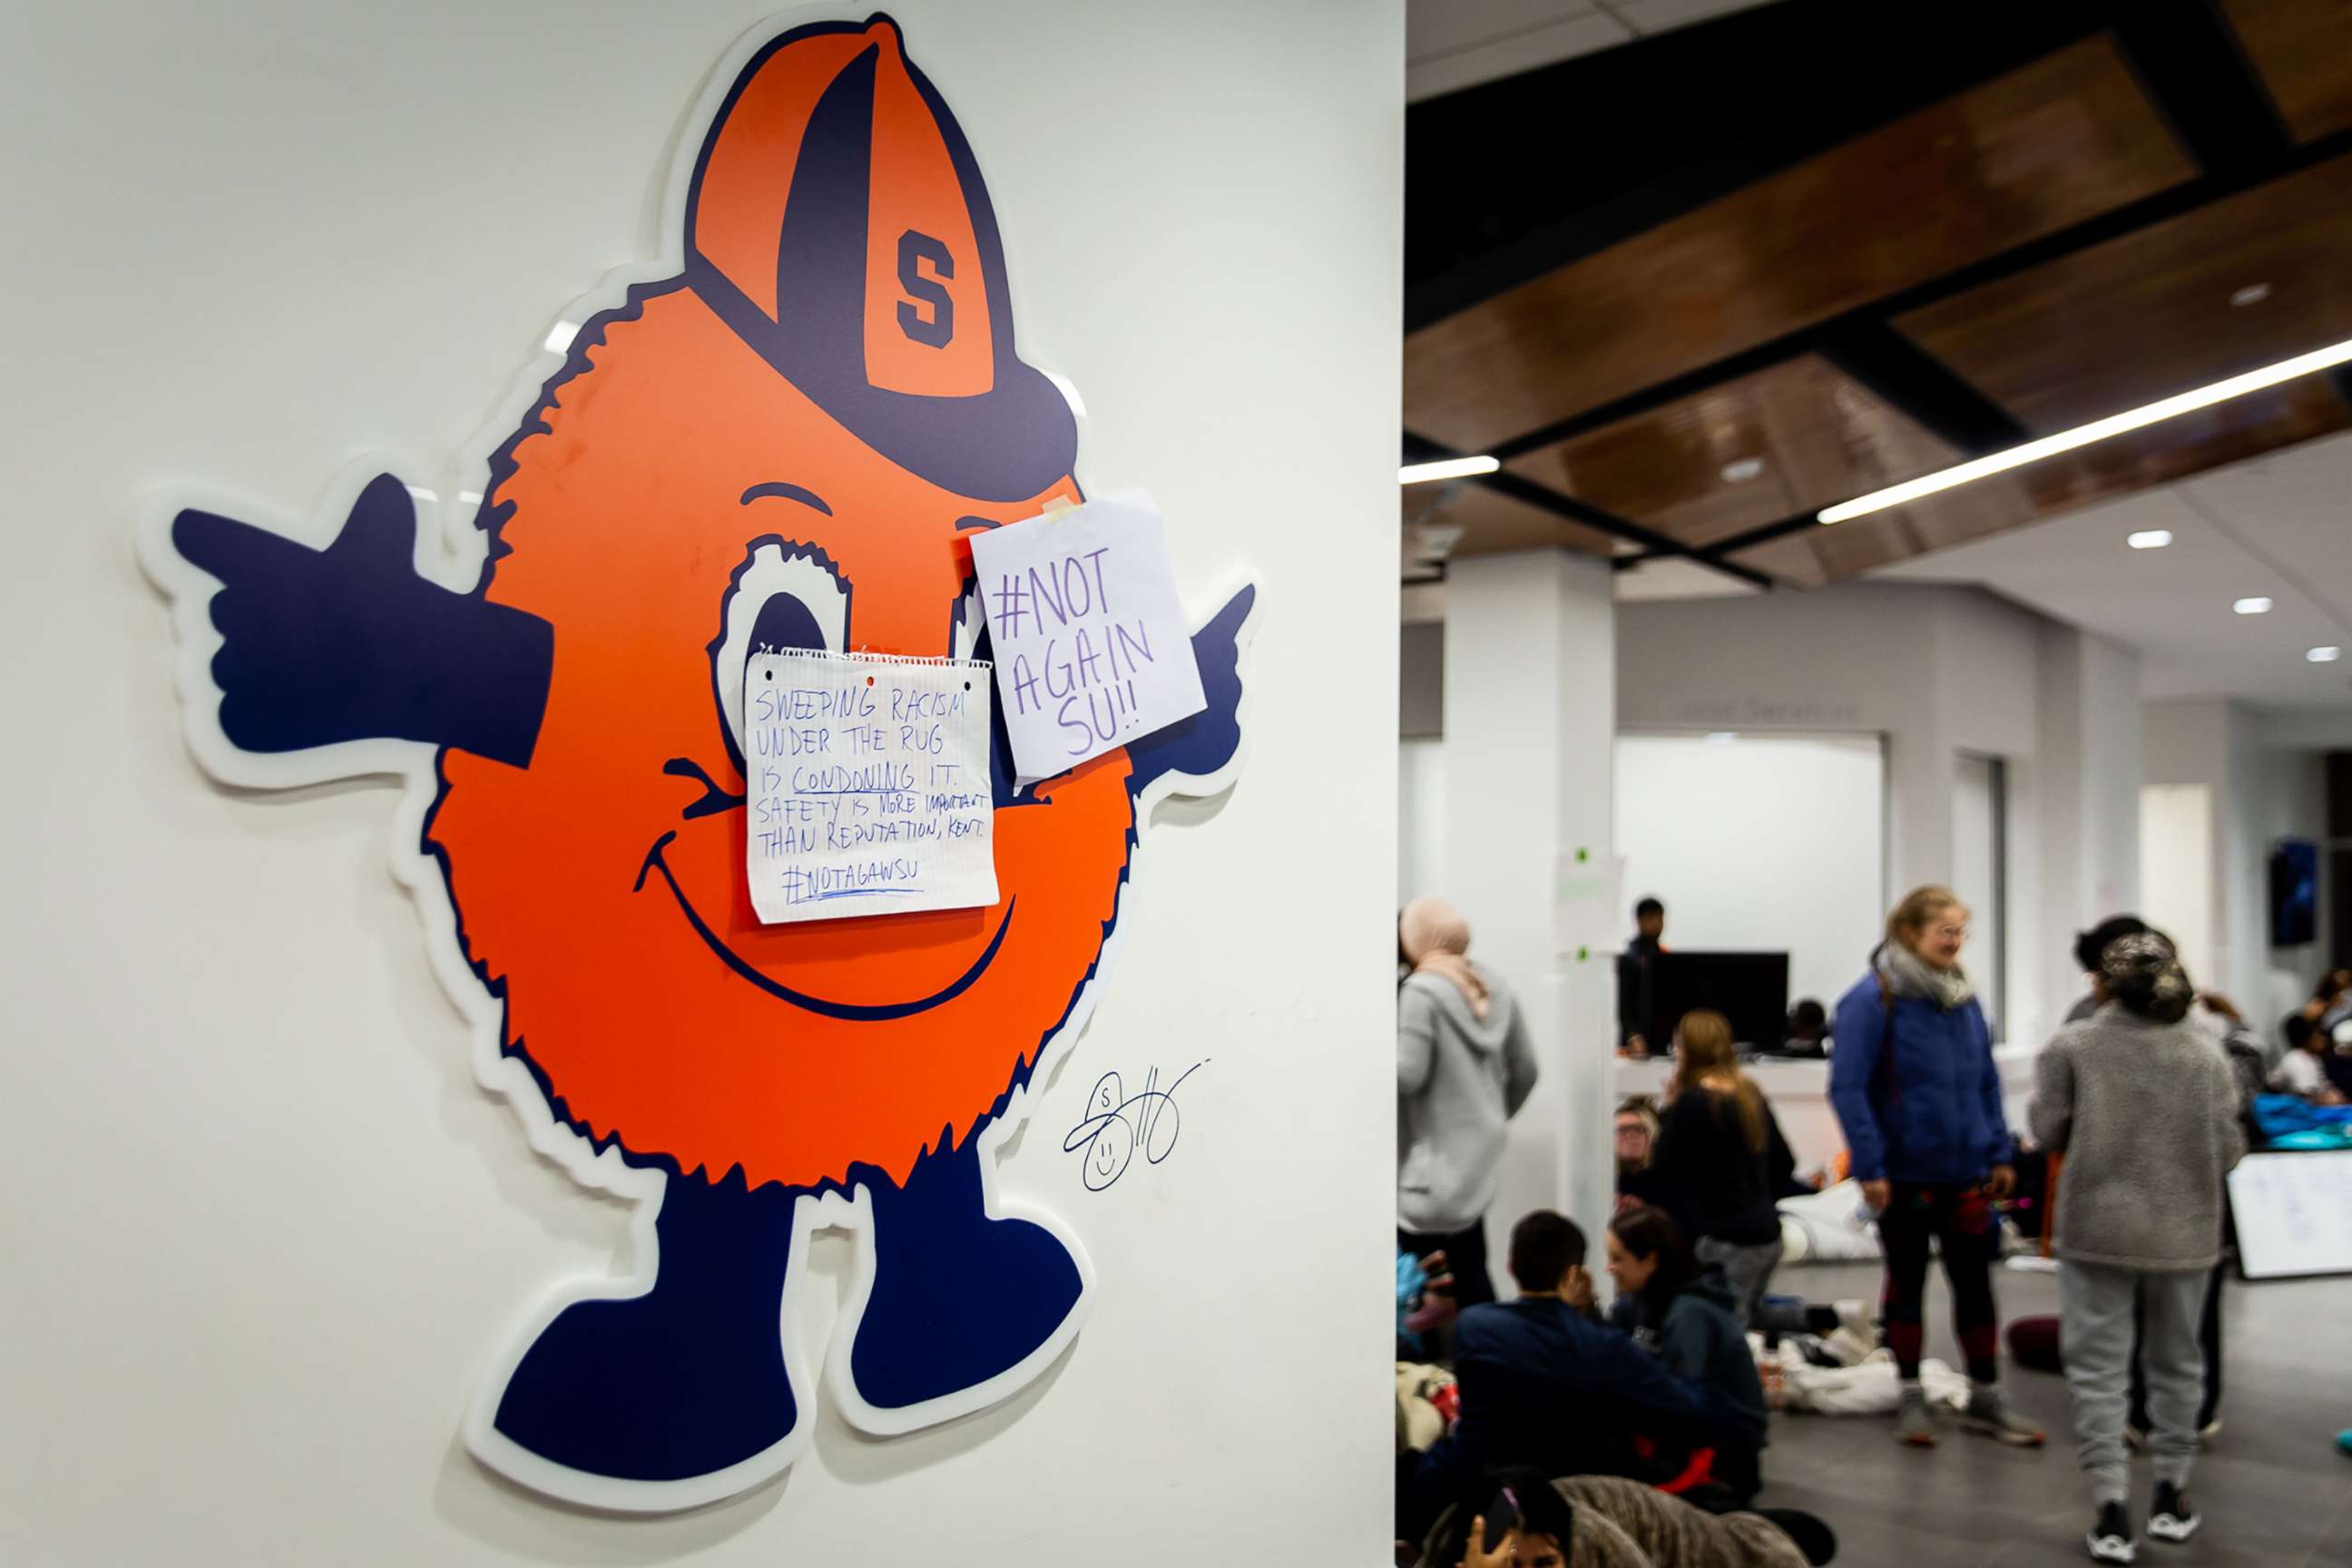 PHOTO: Signs hang on the wall marked with the Twitter hashtag #NotAgainSU as the response by Syracuse University administration to the racist incidents in Syracuse, N.Y., Nov. 19, 2019. 